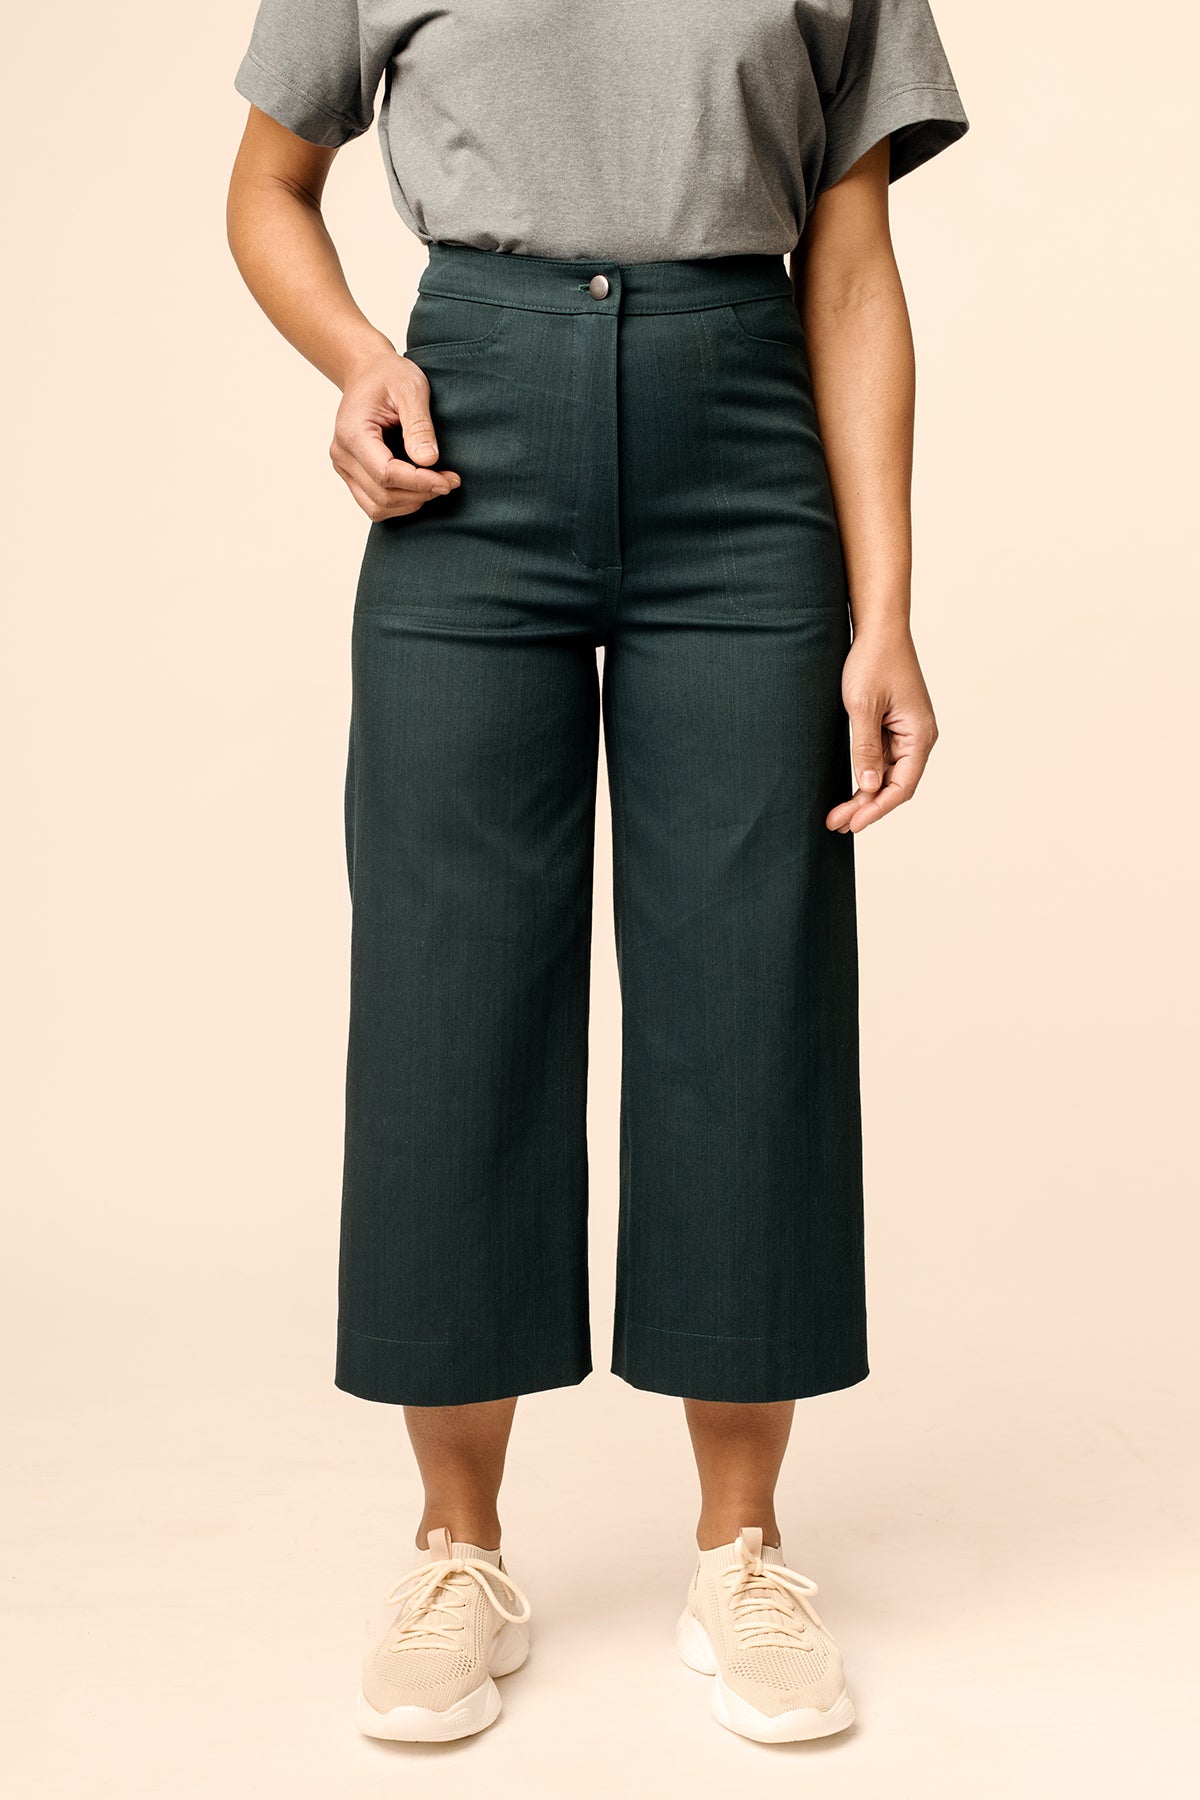 Aina Trousers & Culottes by Named Clothing